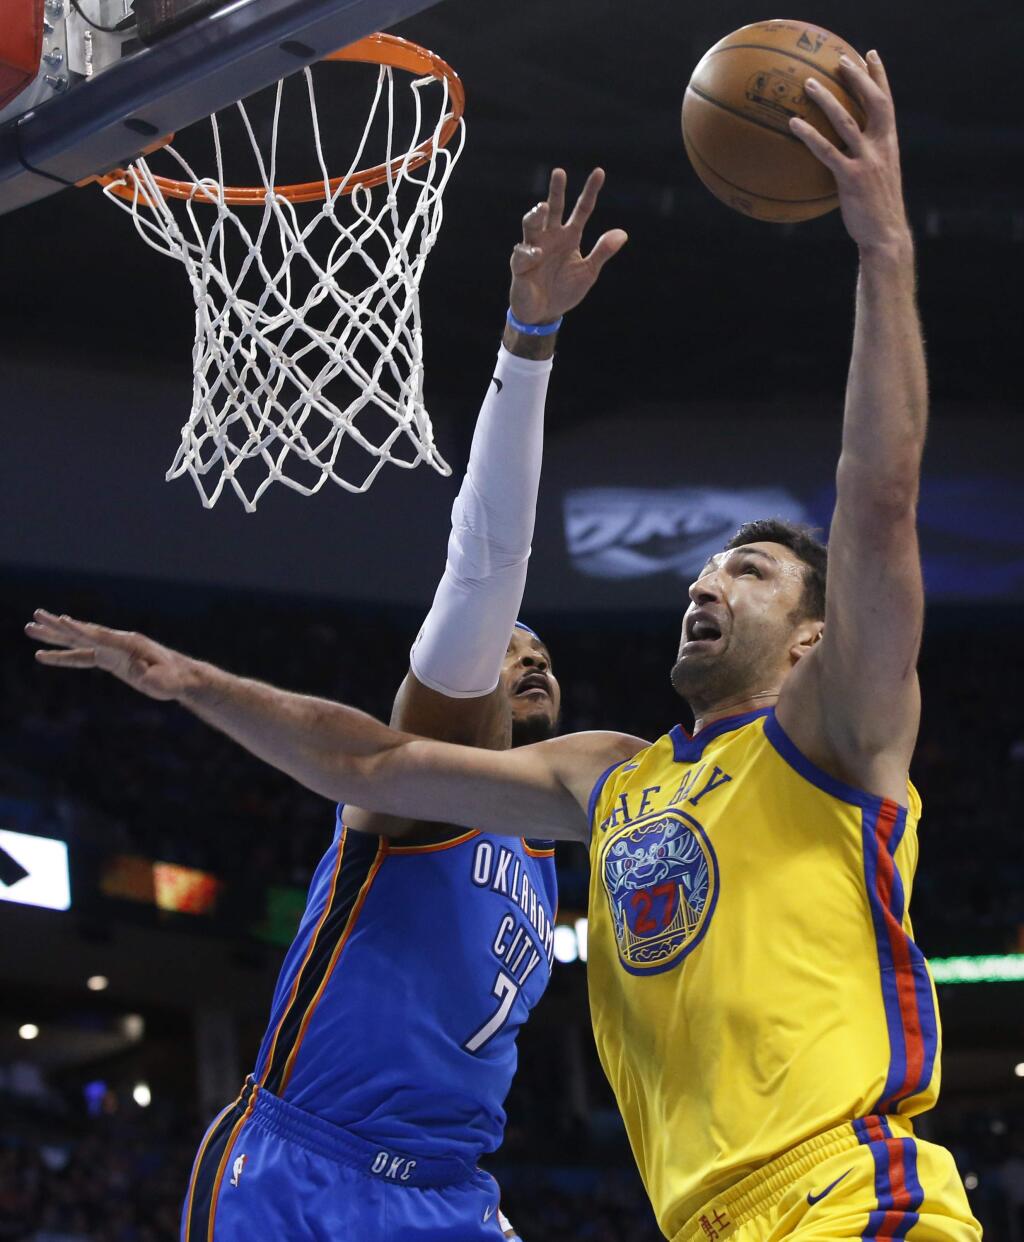 Golden State Warriors center Zaza Pachulia, right, shoots in front of Oklahoma City Thunder forward Carmelo Anthony during the first half in Oklahoma City, Tuesday, April 3, 2018. (AP Photo/Sue Ogrocki)